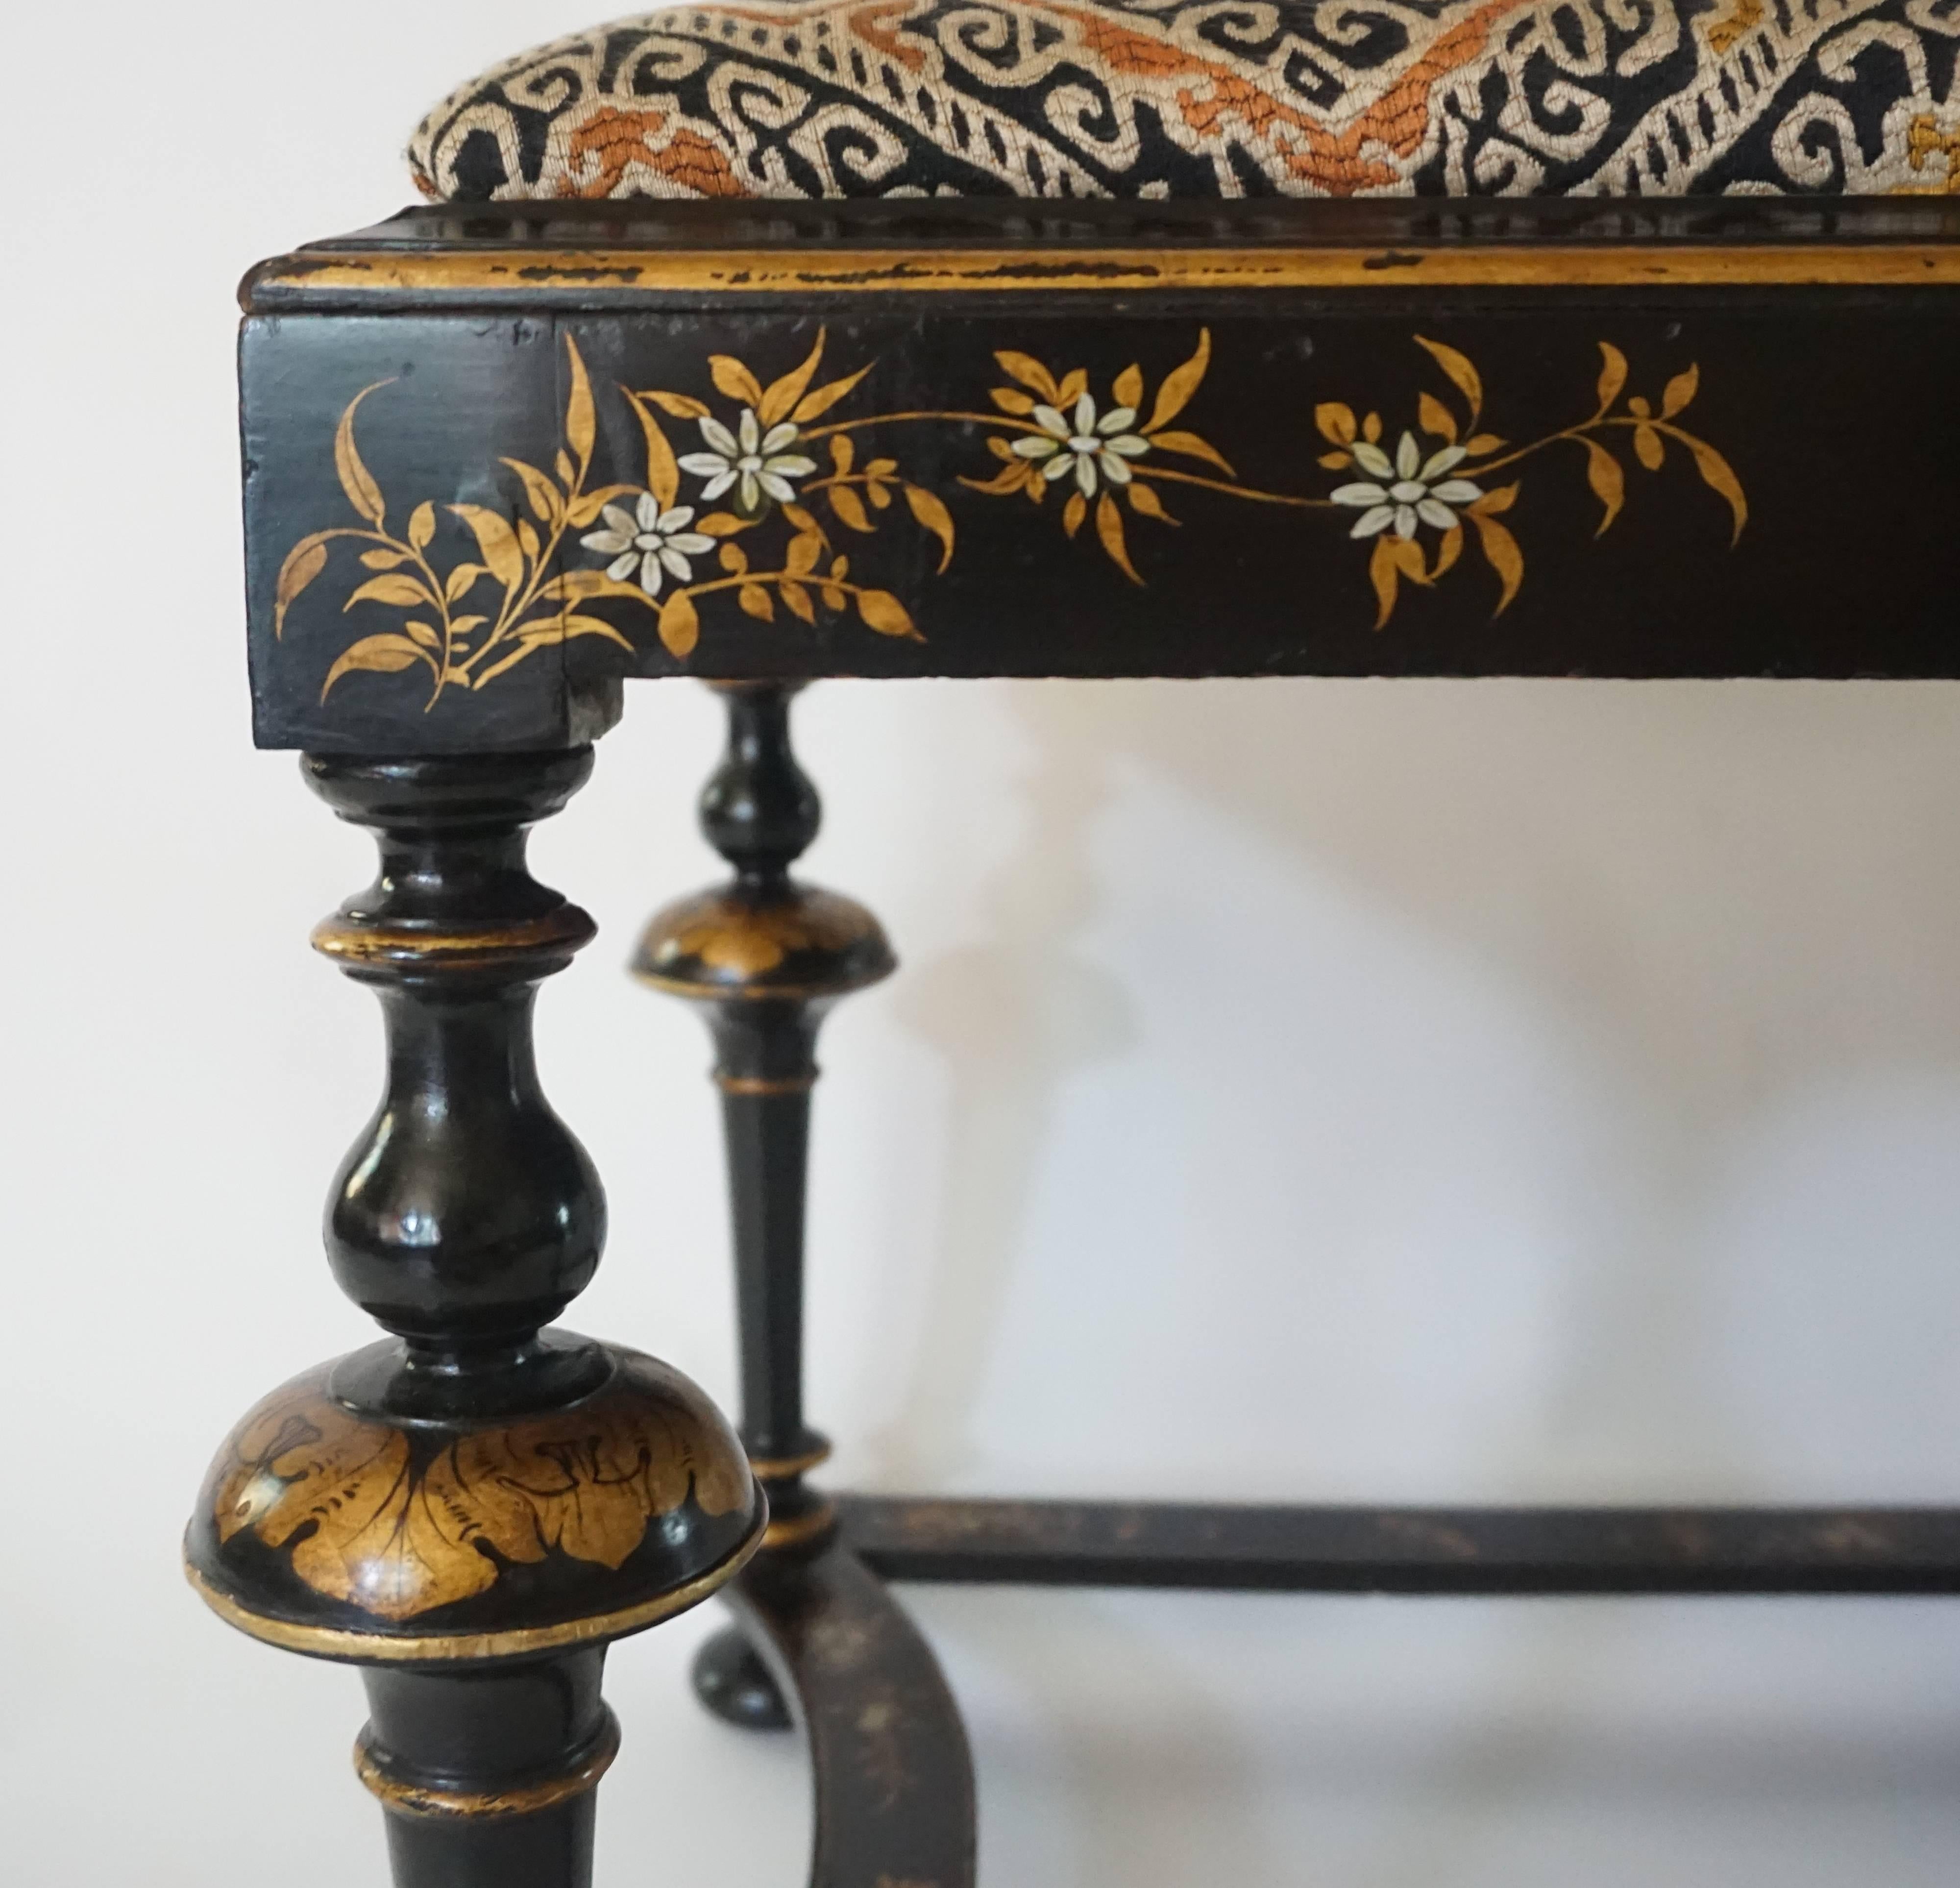 20th Century Chinoiserie Lacquer William and Mary Style Stool or Tabouret